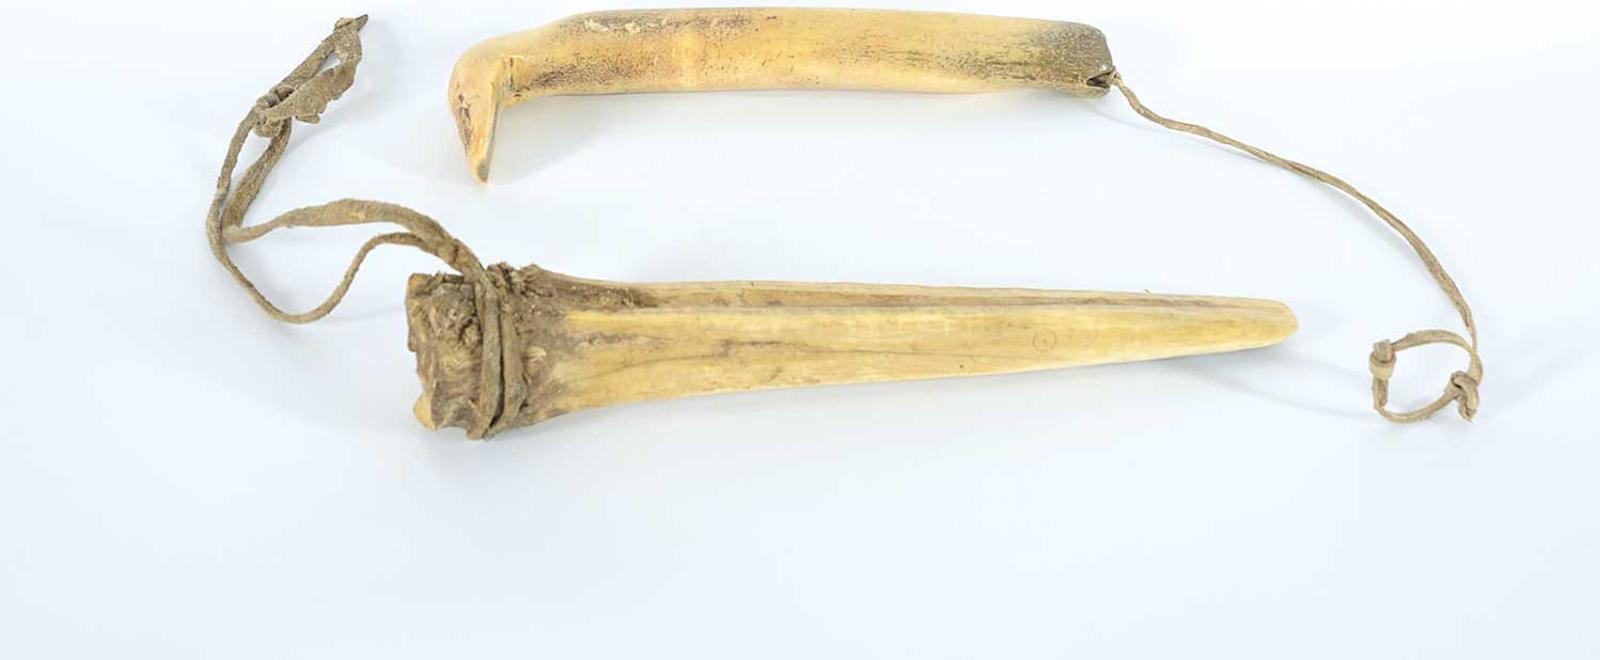 First Nations Basket School - Bone Implements